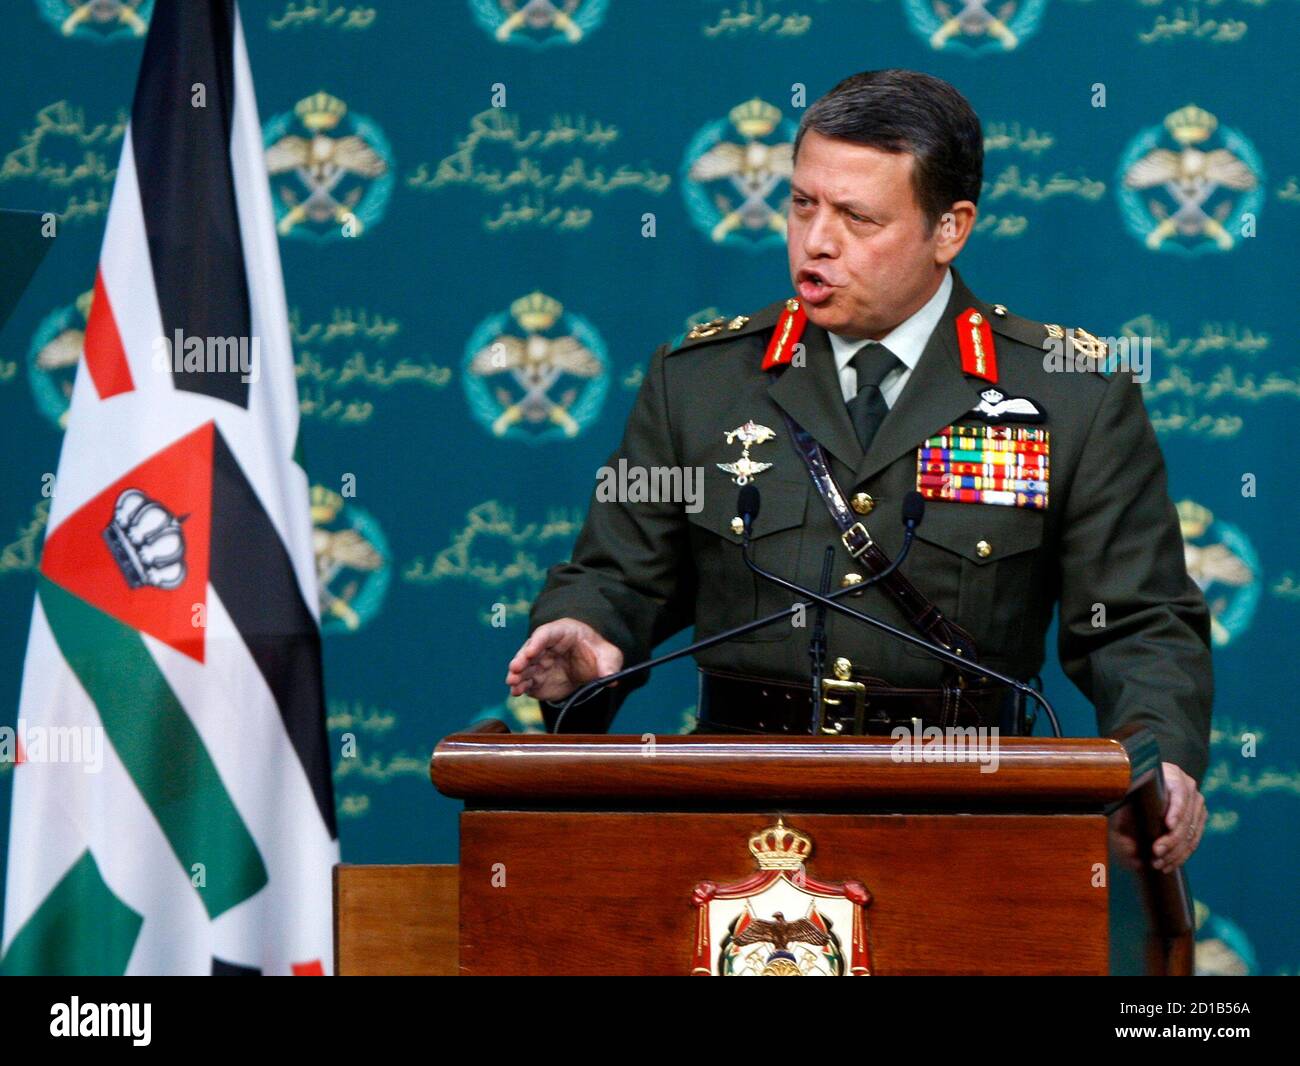 Jordan's King Abdullah speaks during his speech at official celebrations to  mark the 11th anniversary of Abdullah's accession to the throne and Army  Day, in Amman June 8, 2010. King Abullah on